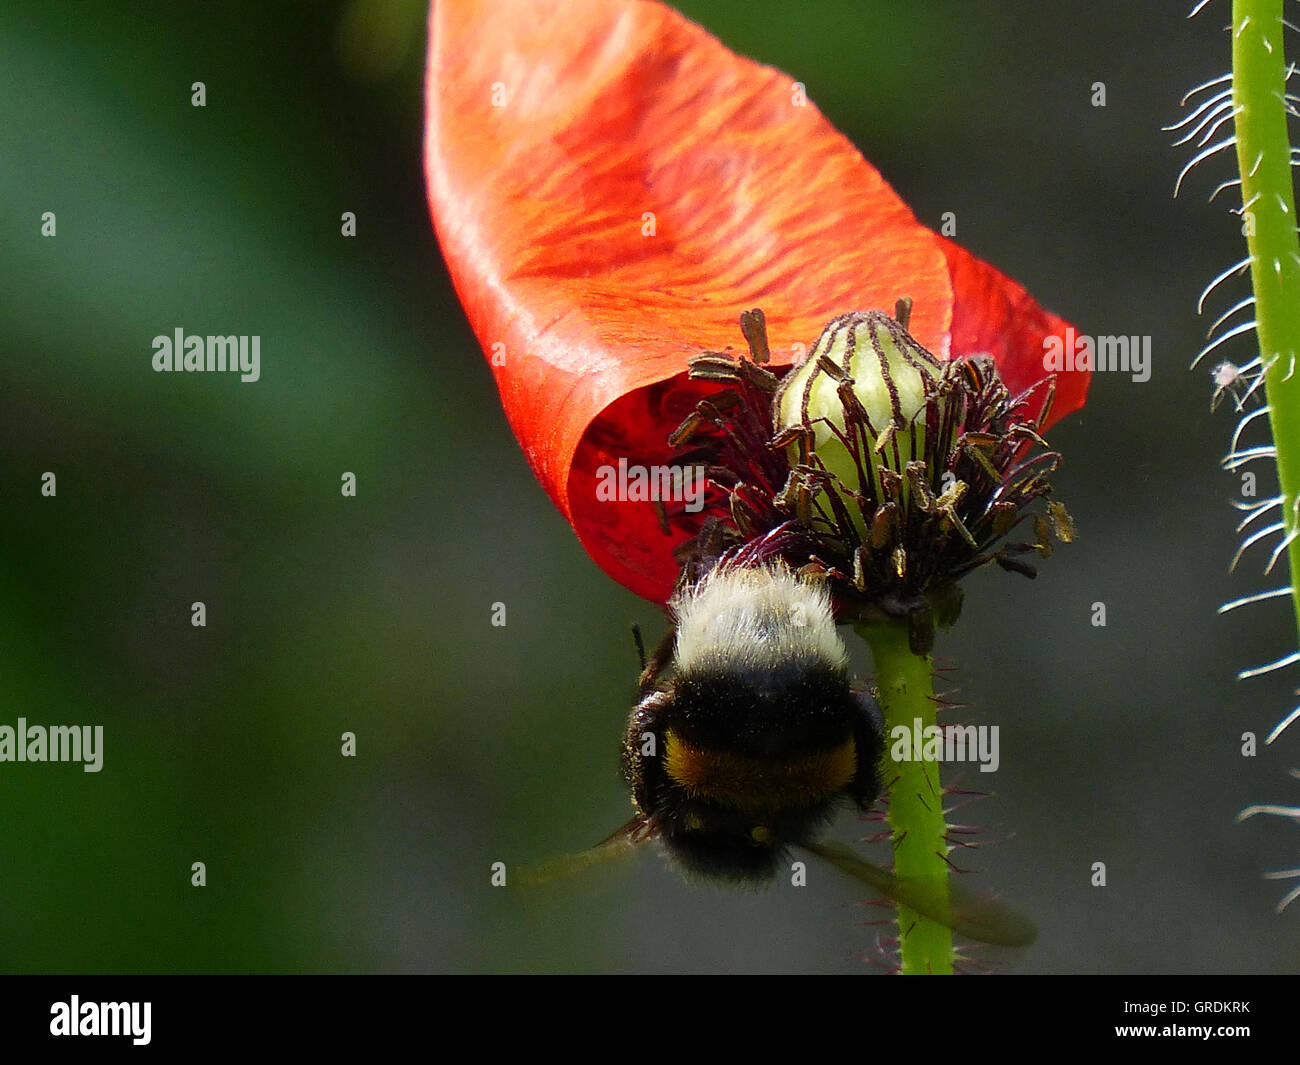 Bumblebee Gets Nectar From Flowering Red Poppy, Dark Green Background Stock Photo